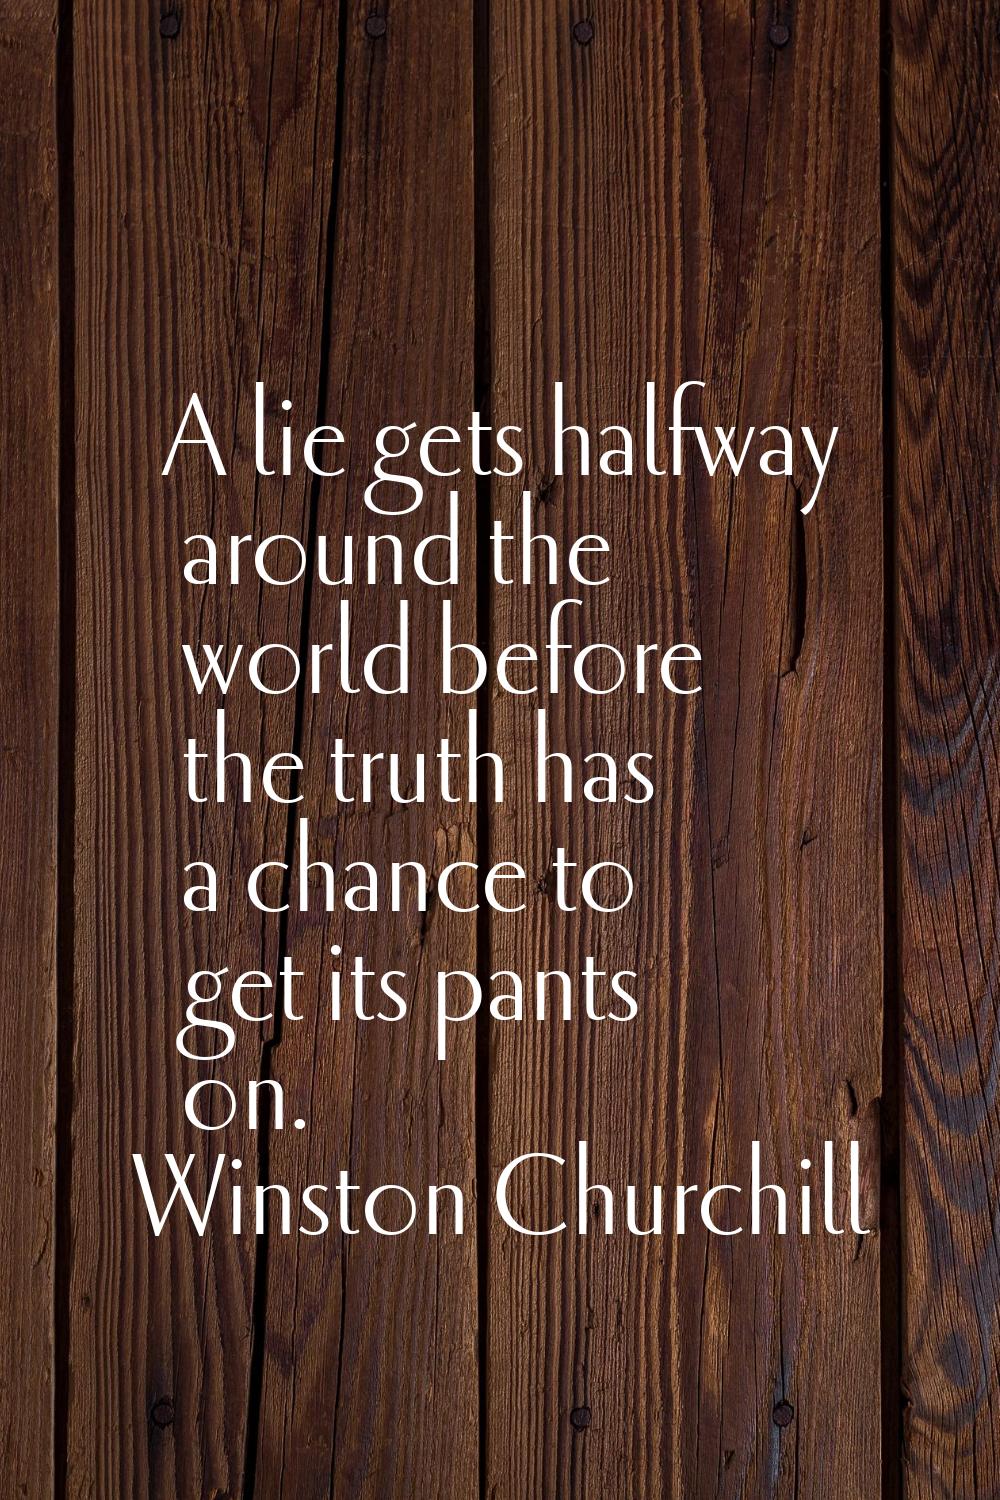 A lie gets halfway around the world before the truth has a chance to get its pants on.